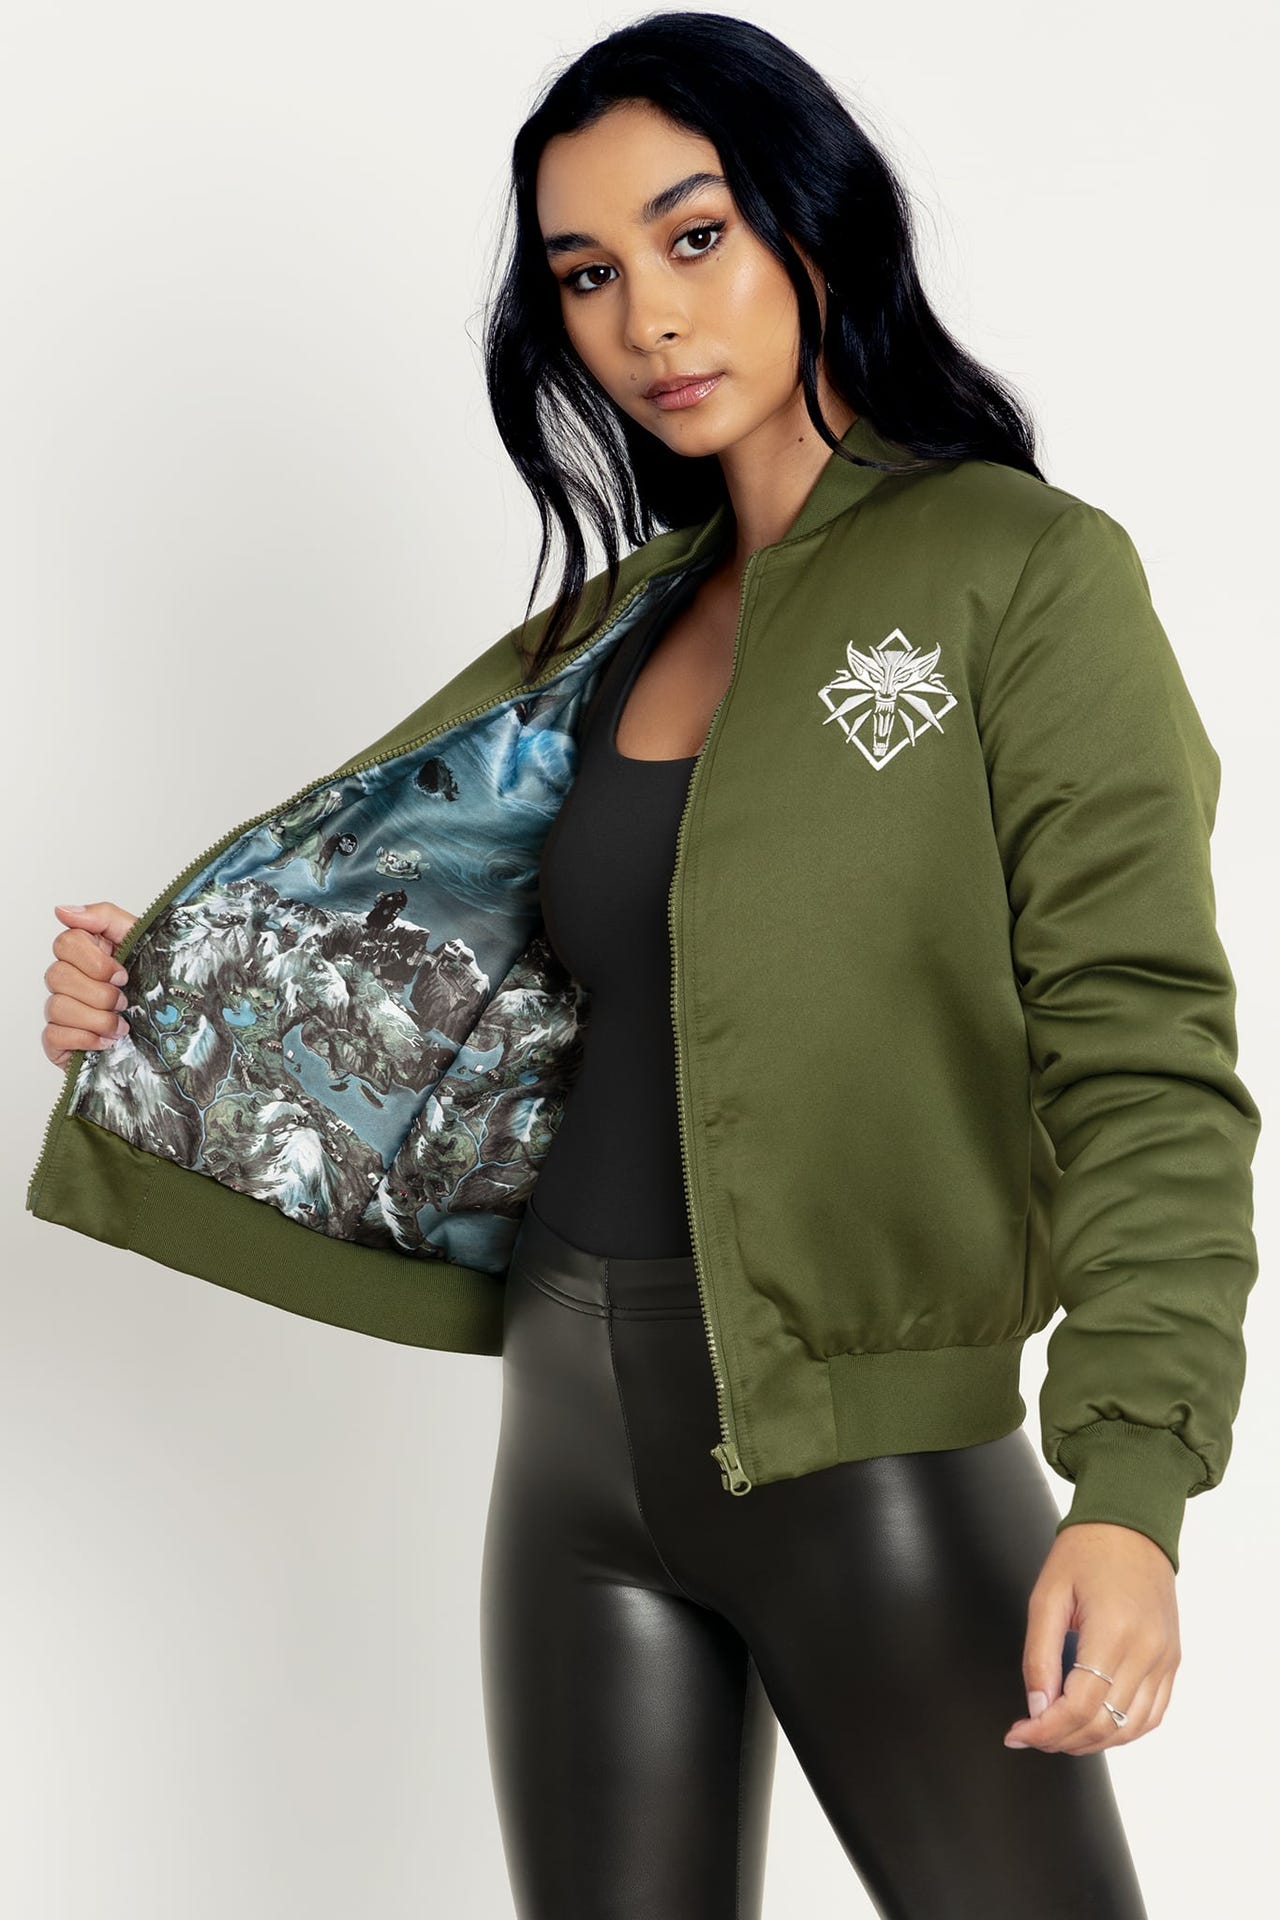 The Witcher Bomber Jacket - Limited